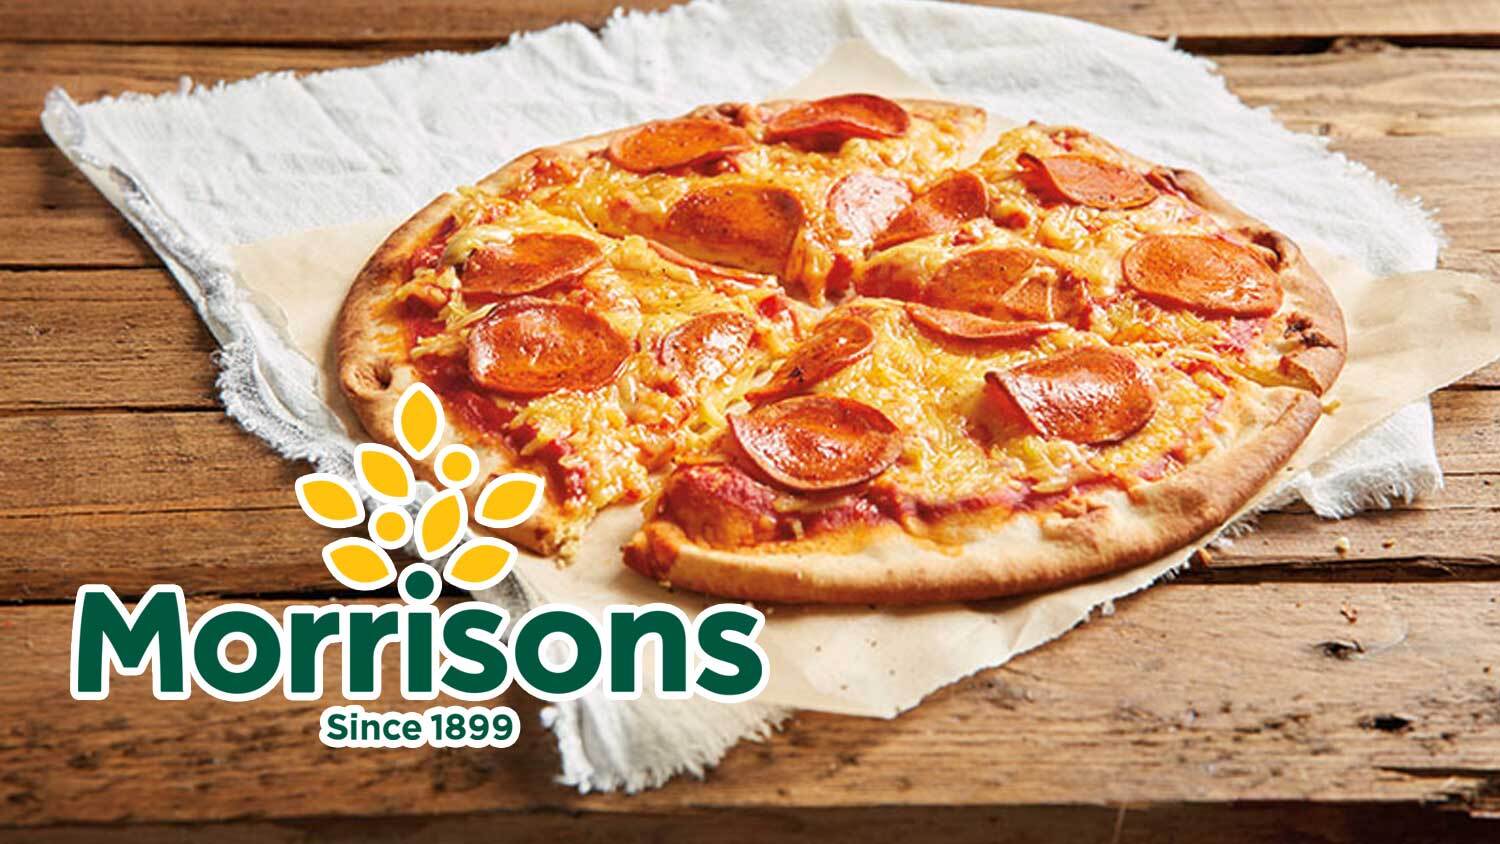 Morrisons Just Launched £2.50 Vegan Pepperoni Pizza | LIVEKINDLY